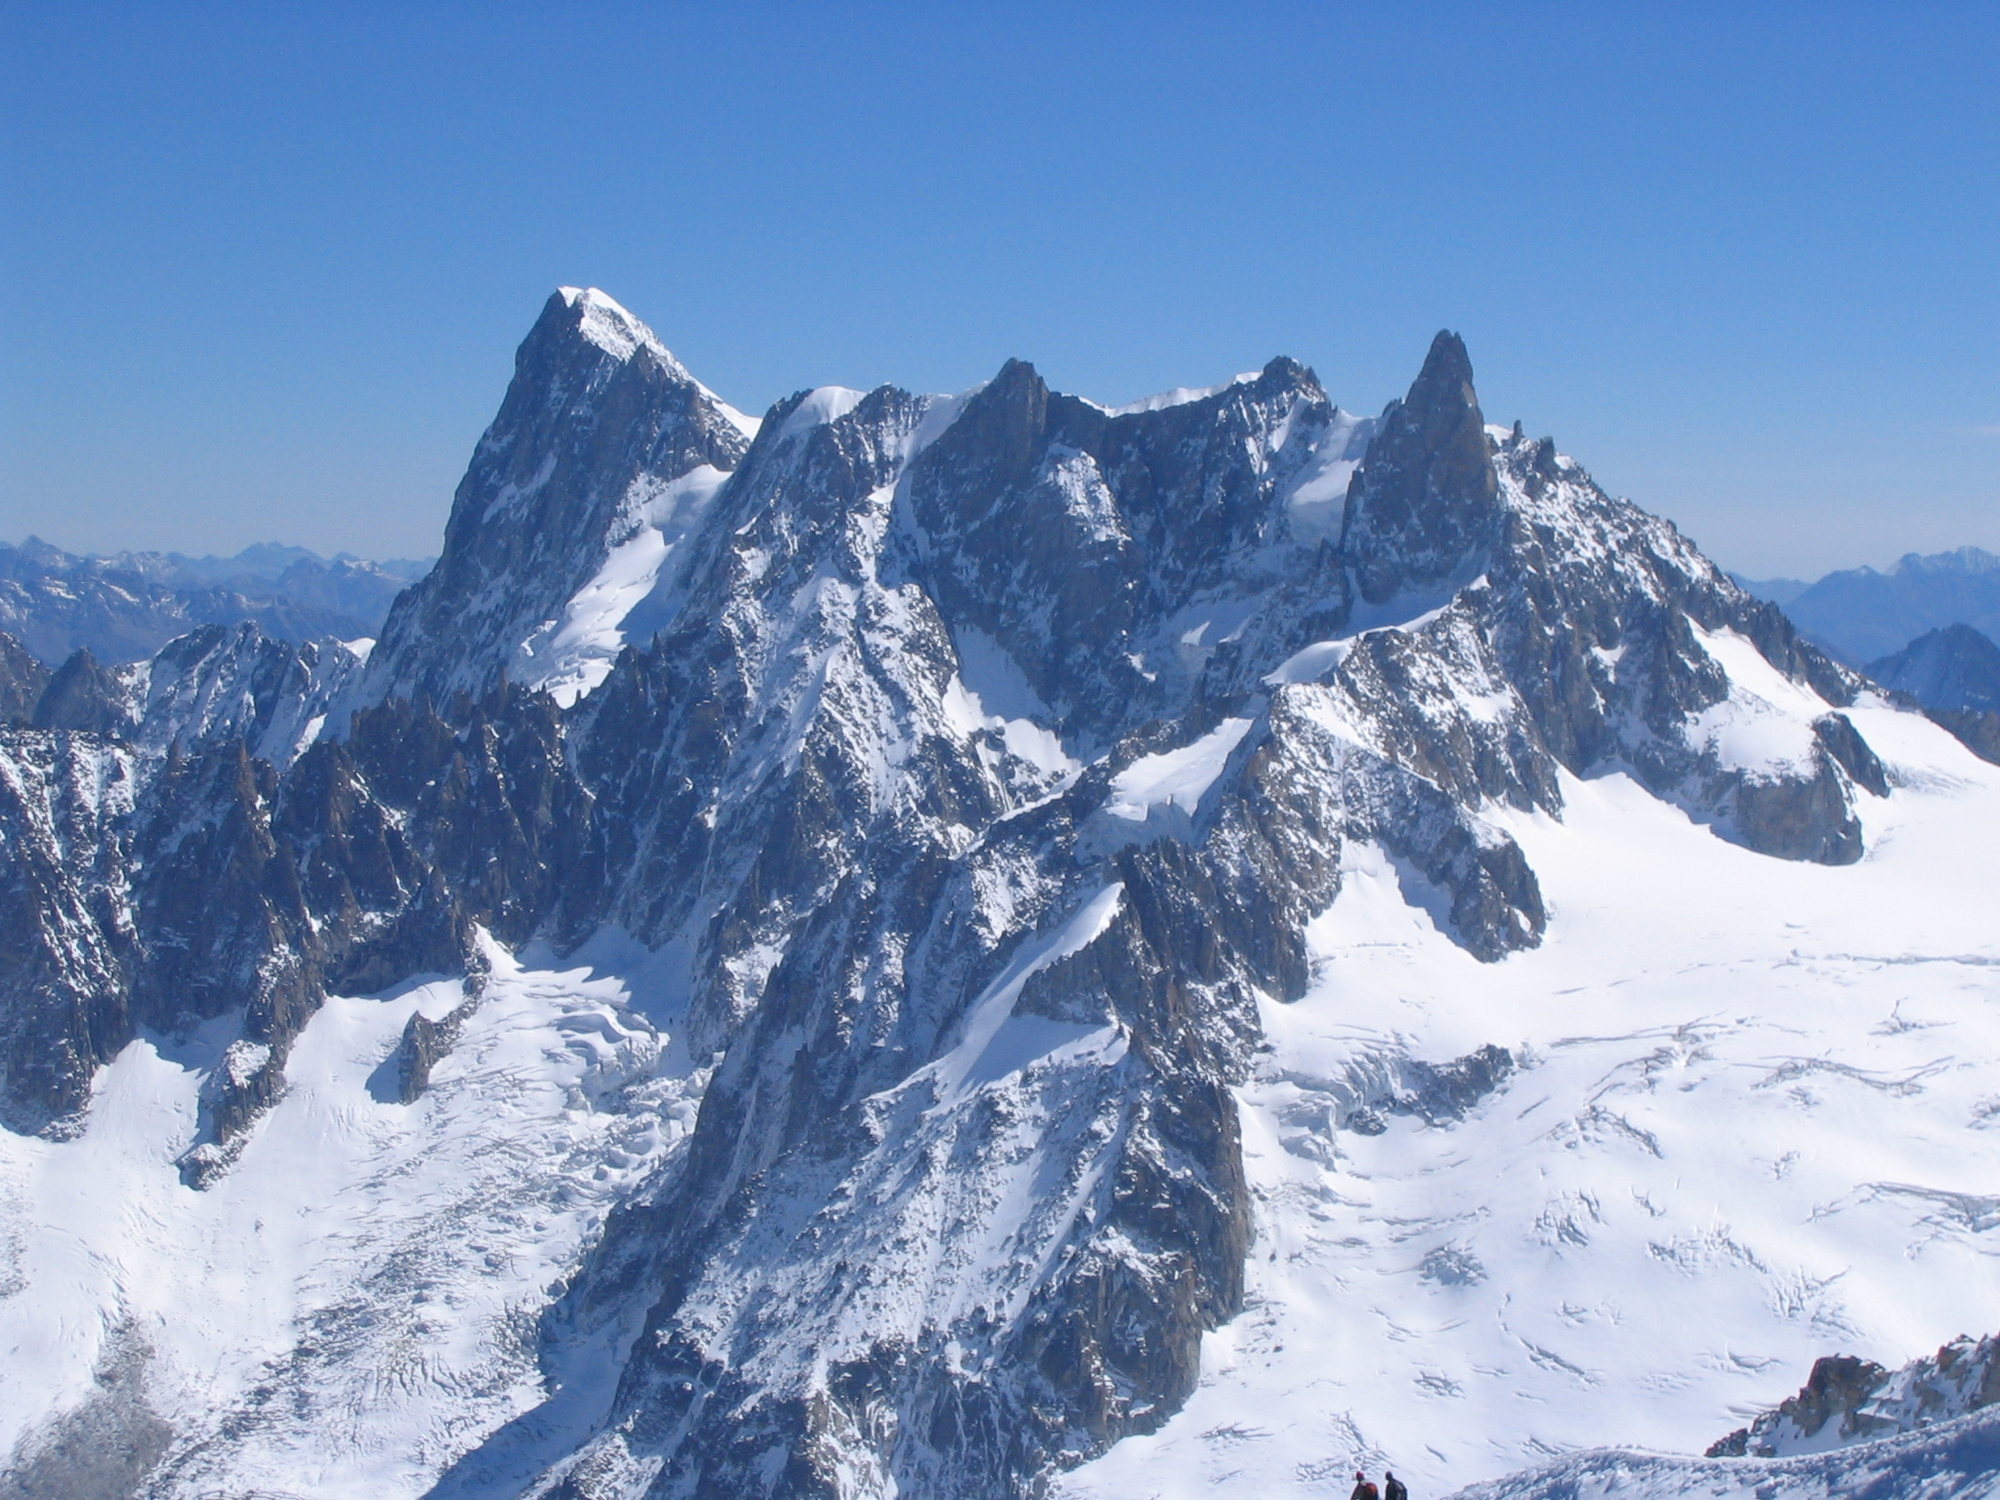 Grandes Jorasses. The Walker Spur is the steep face on the left skyline. The  right-most spire is the Dent du Geant.